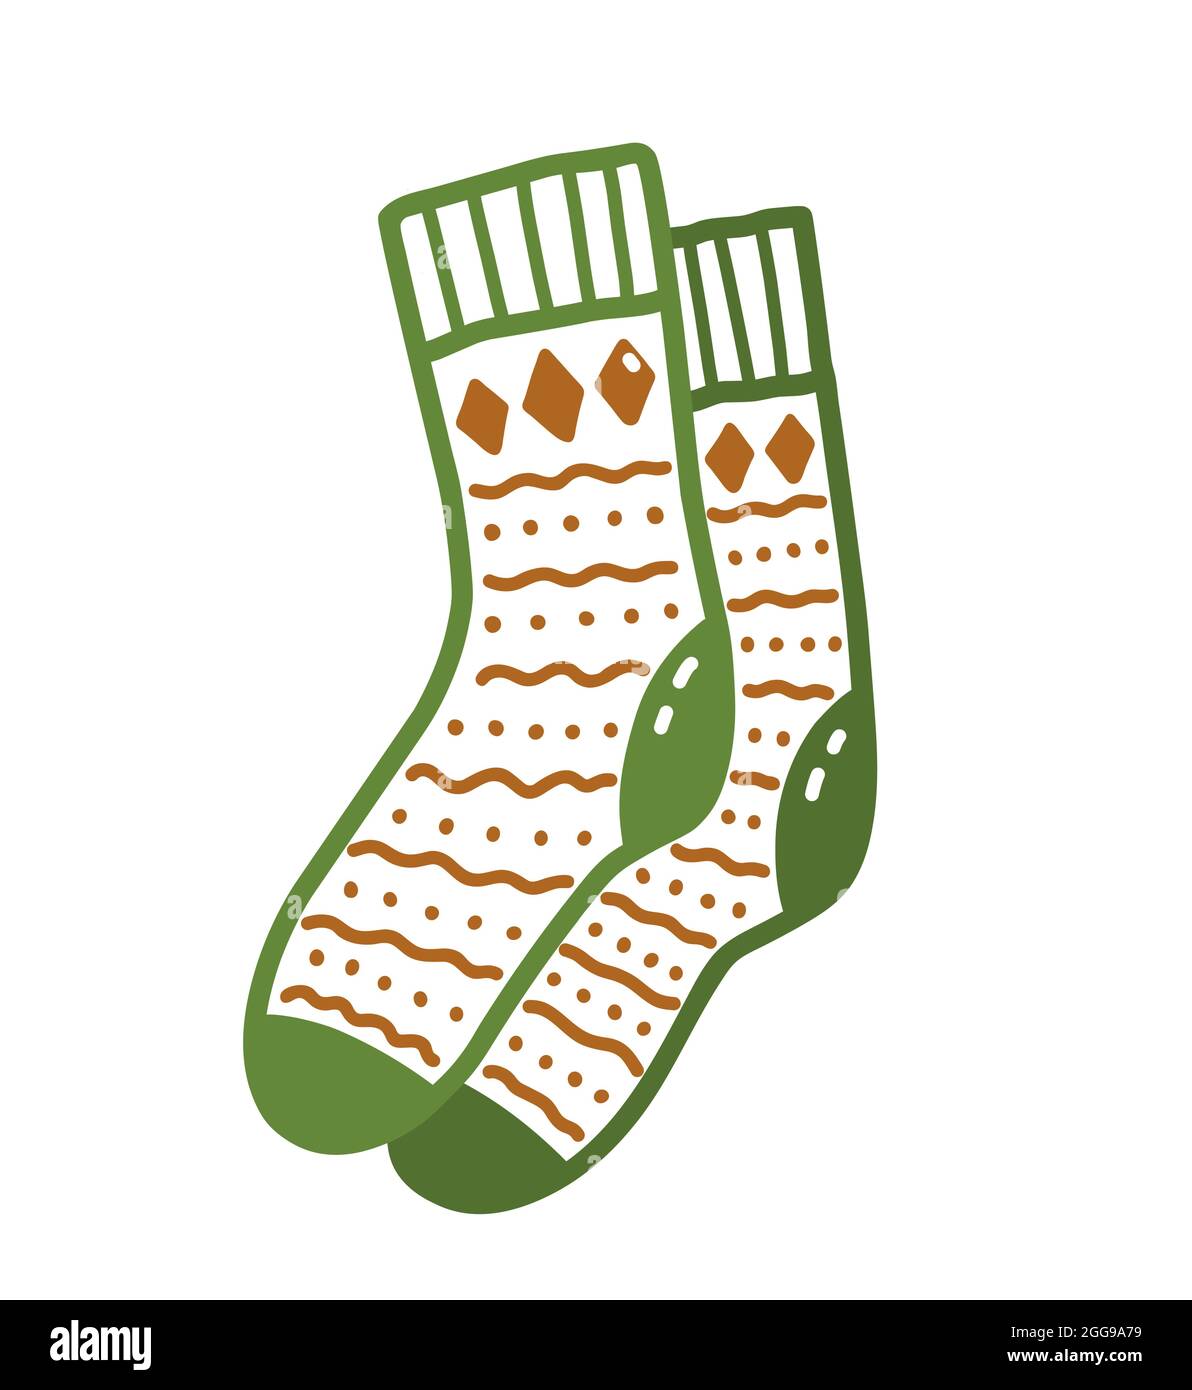 Pair of cute warm patterned socks in doodle style. Hand-drawn vector illustration isolated on white background. Perfect for cards, logo, autumn and holiday designs, decorations. Stock Vector